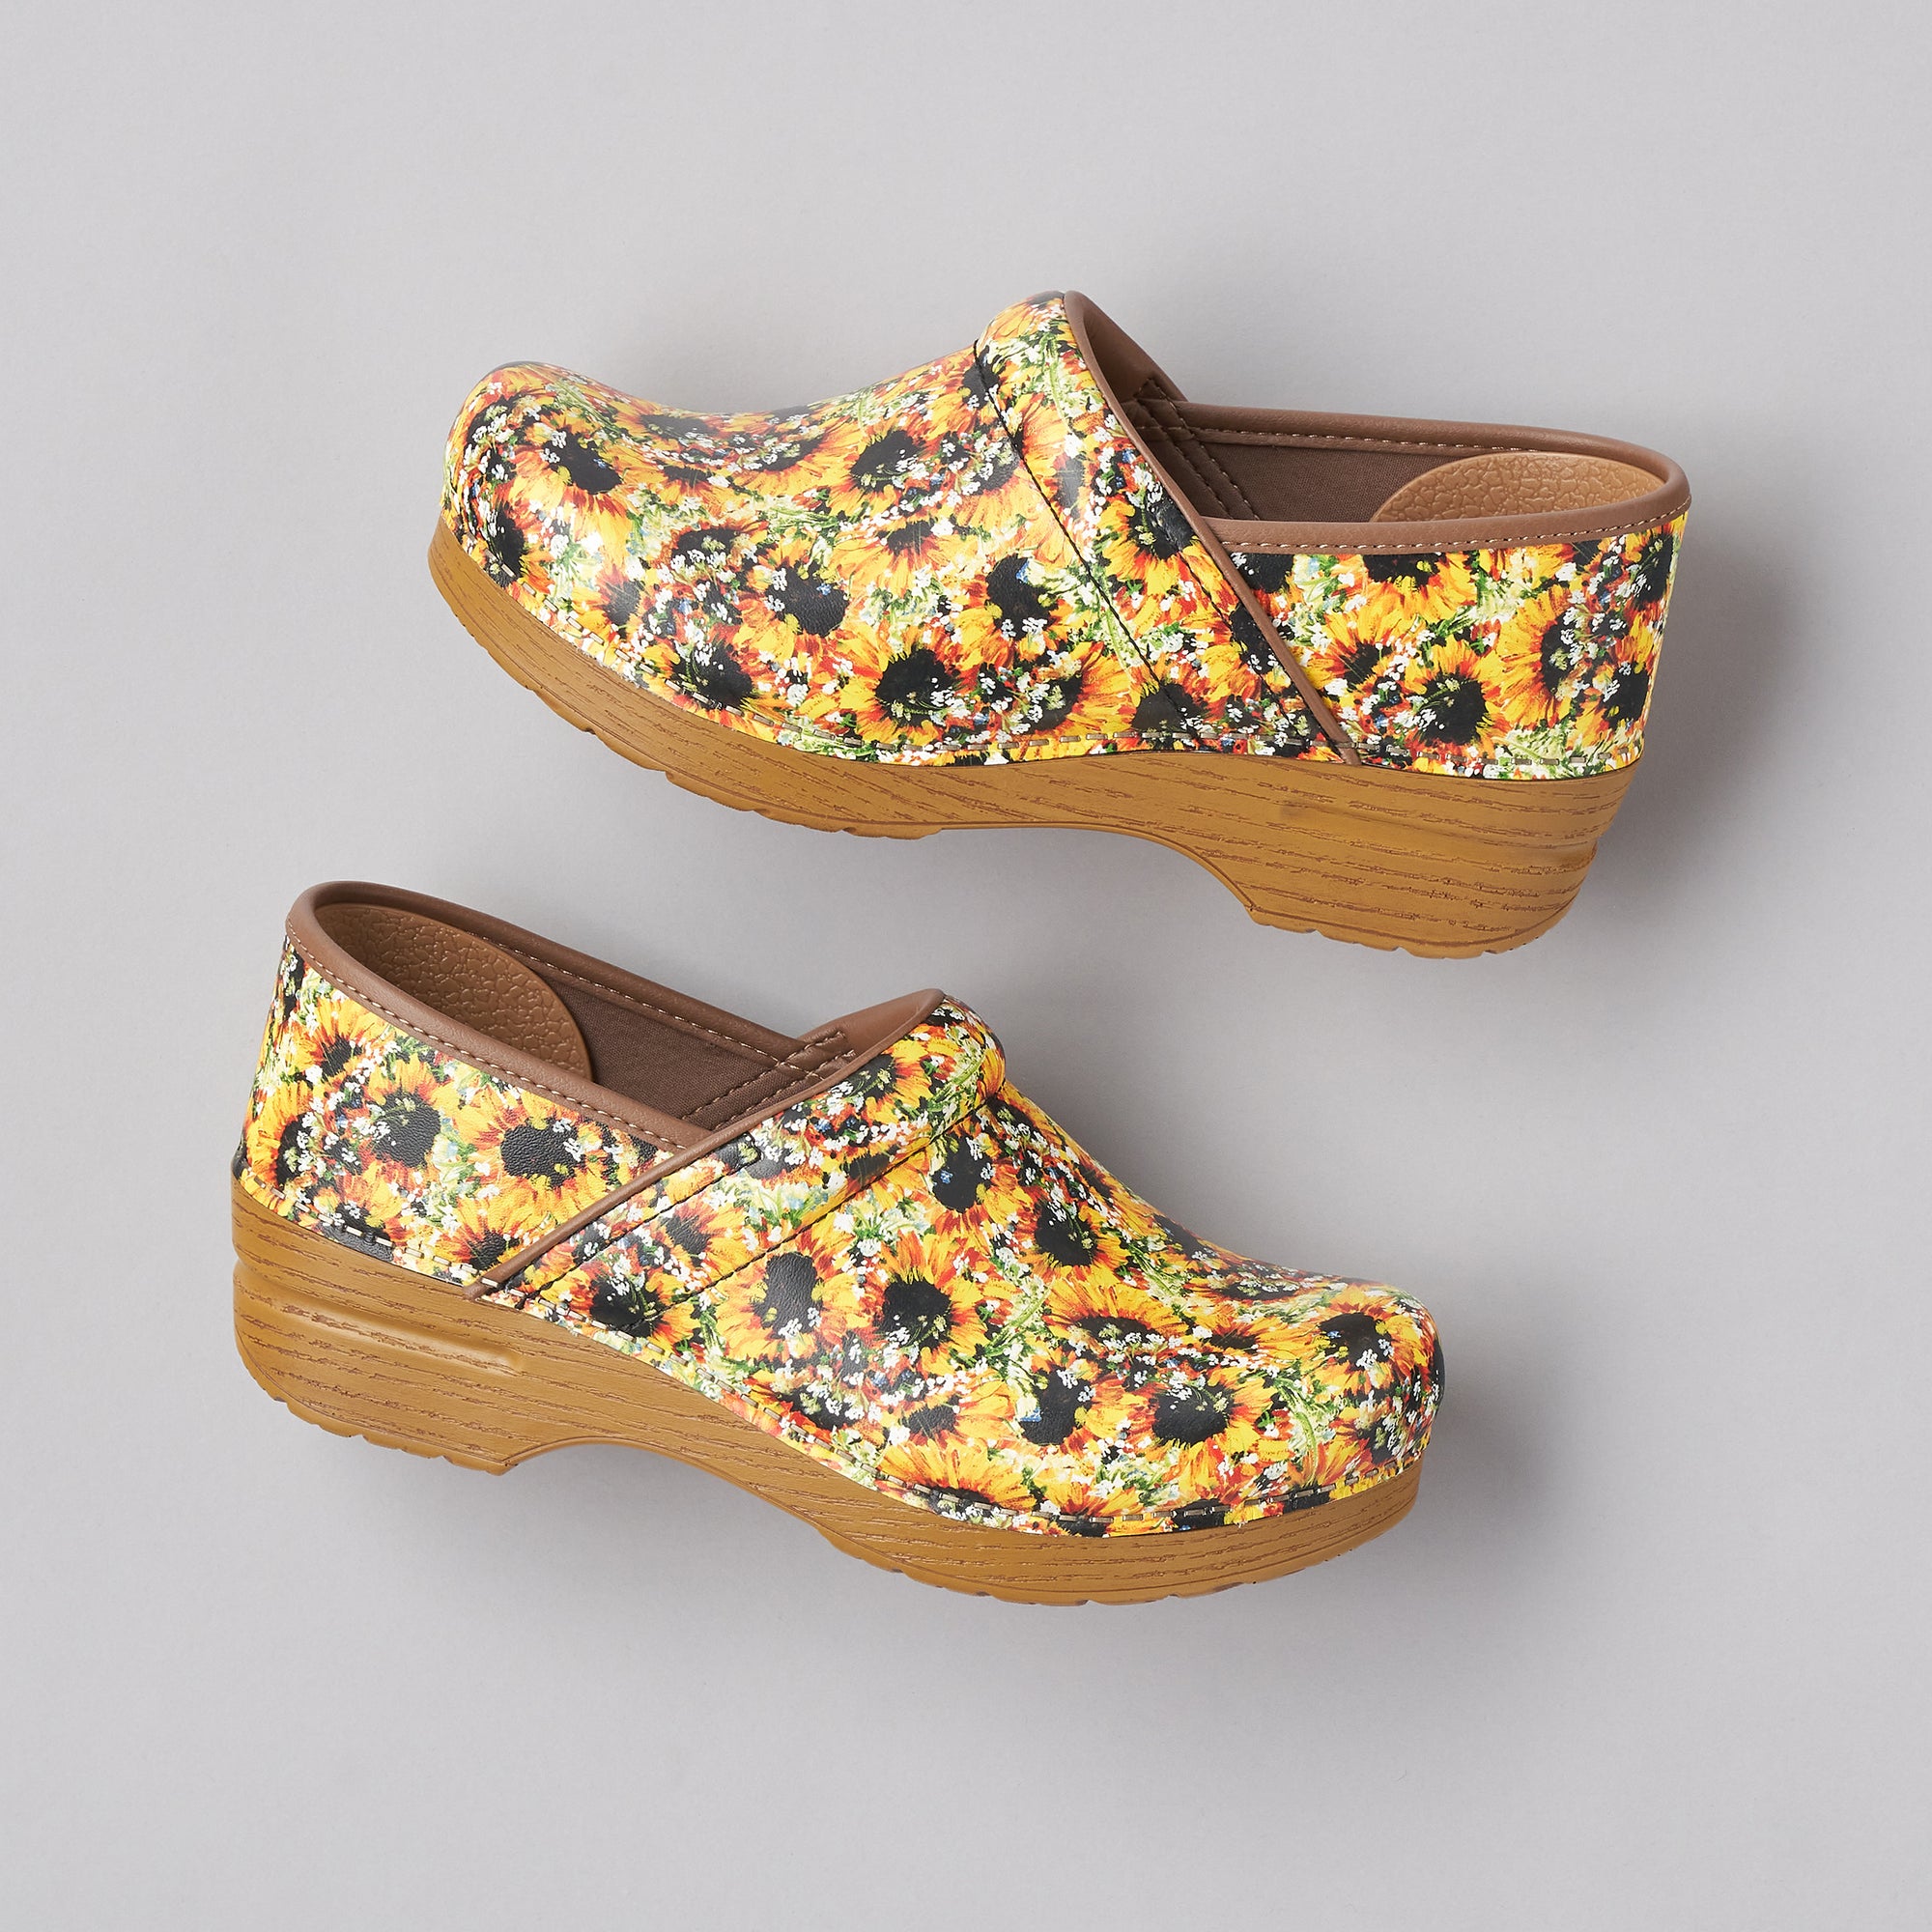 A side view of sunflower leather clogs with a faux leather sole.